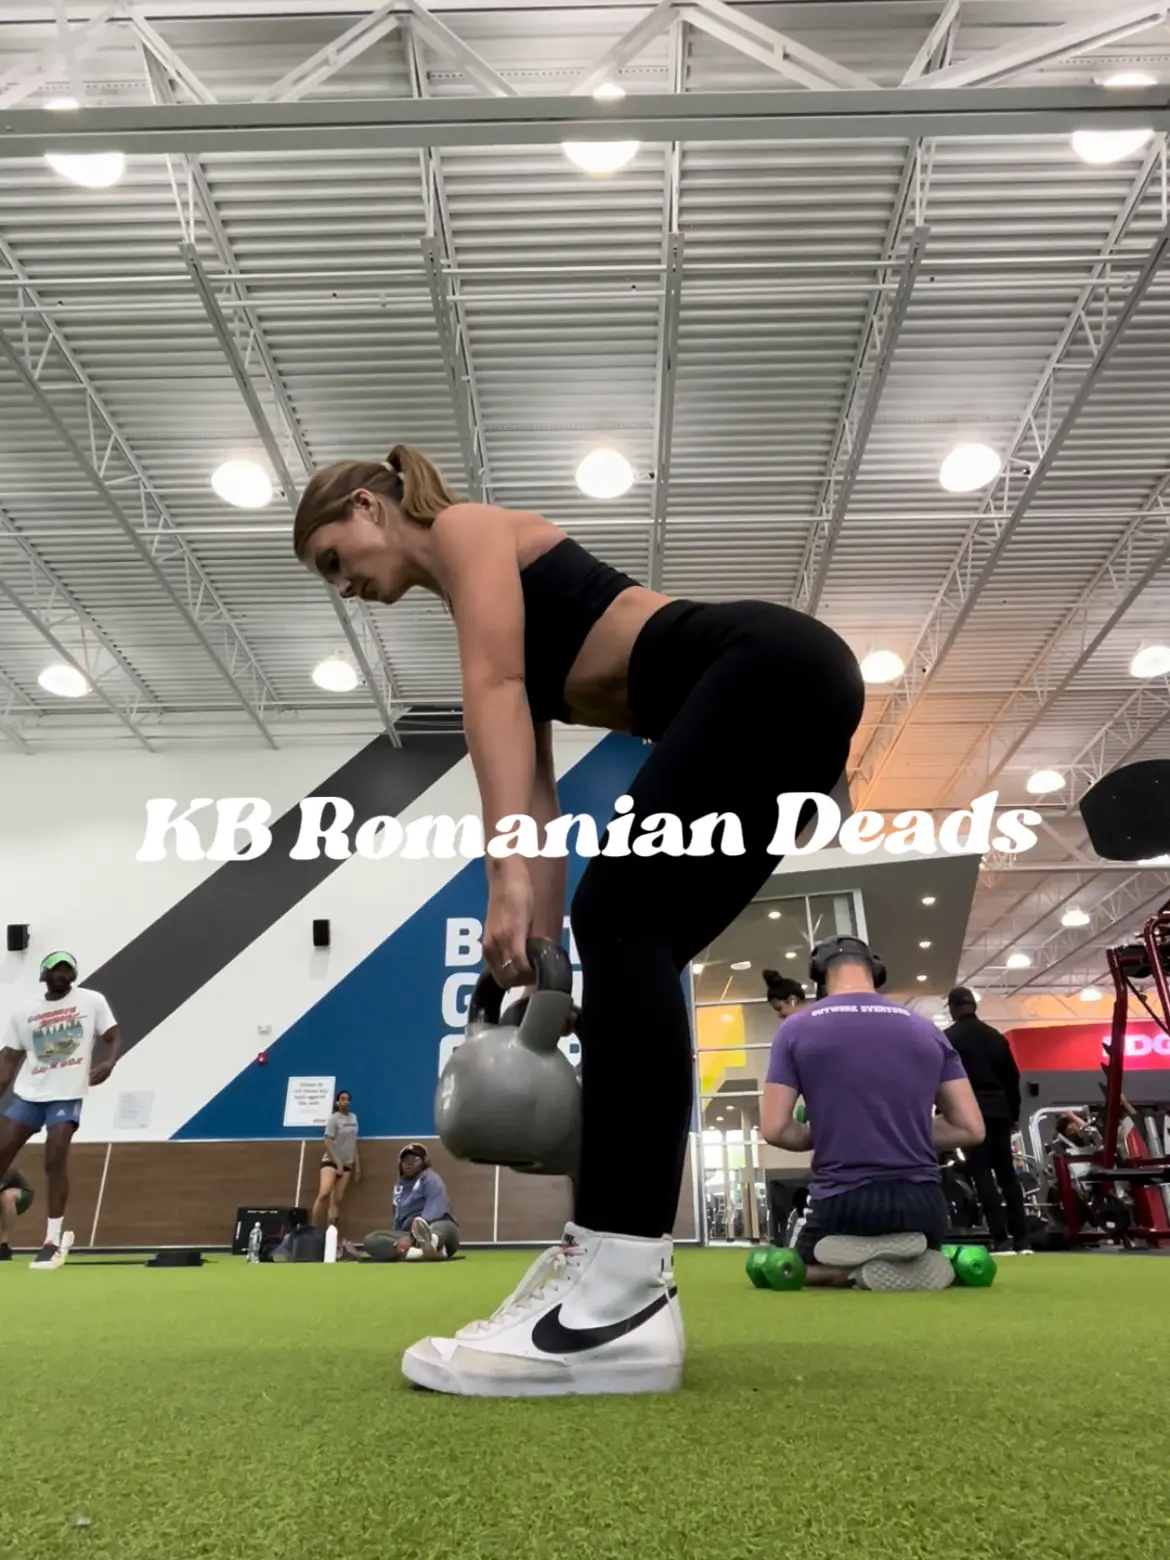 RL Dance Co - It's Leg Day! Get your squat on with this mix of cardio,  core, and leg workout. We did this as a partner workout in class today so if